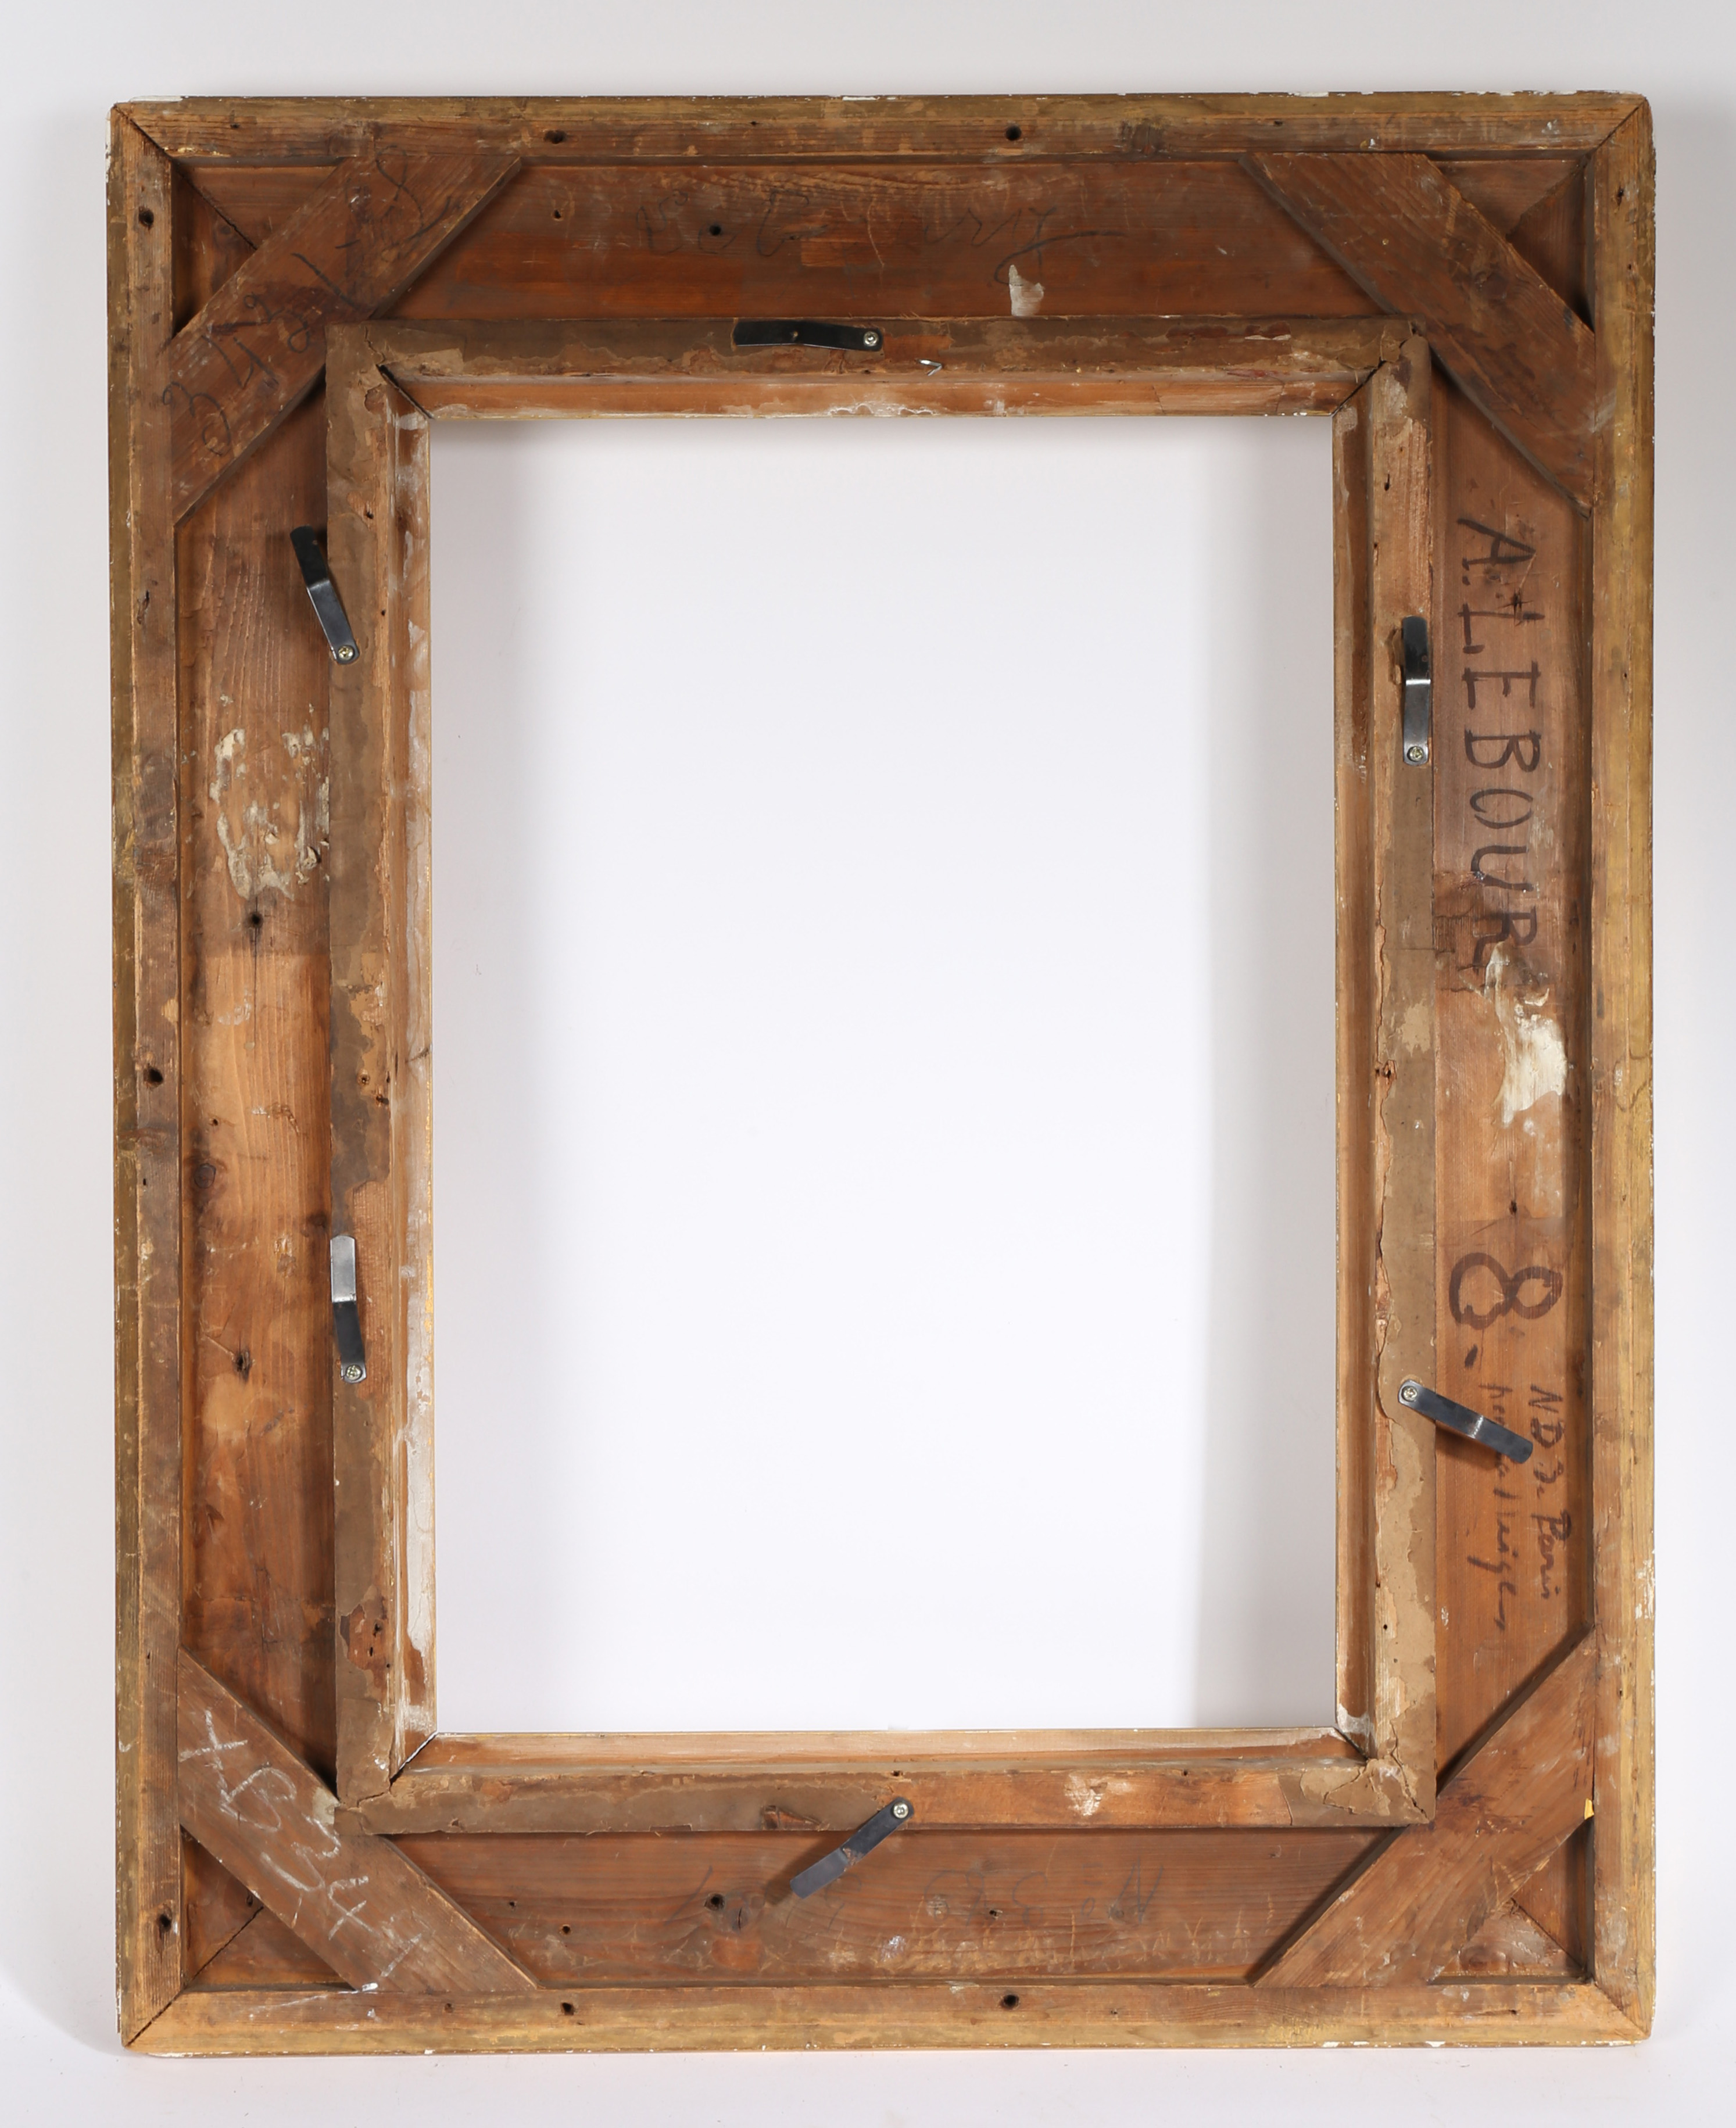 19th century French heavily moulded picture frame - rebate size 22in x 15.5in - Image 3 of 3